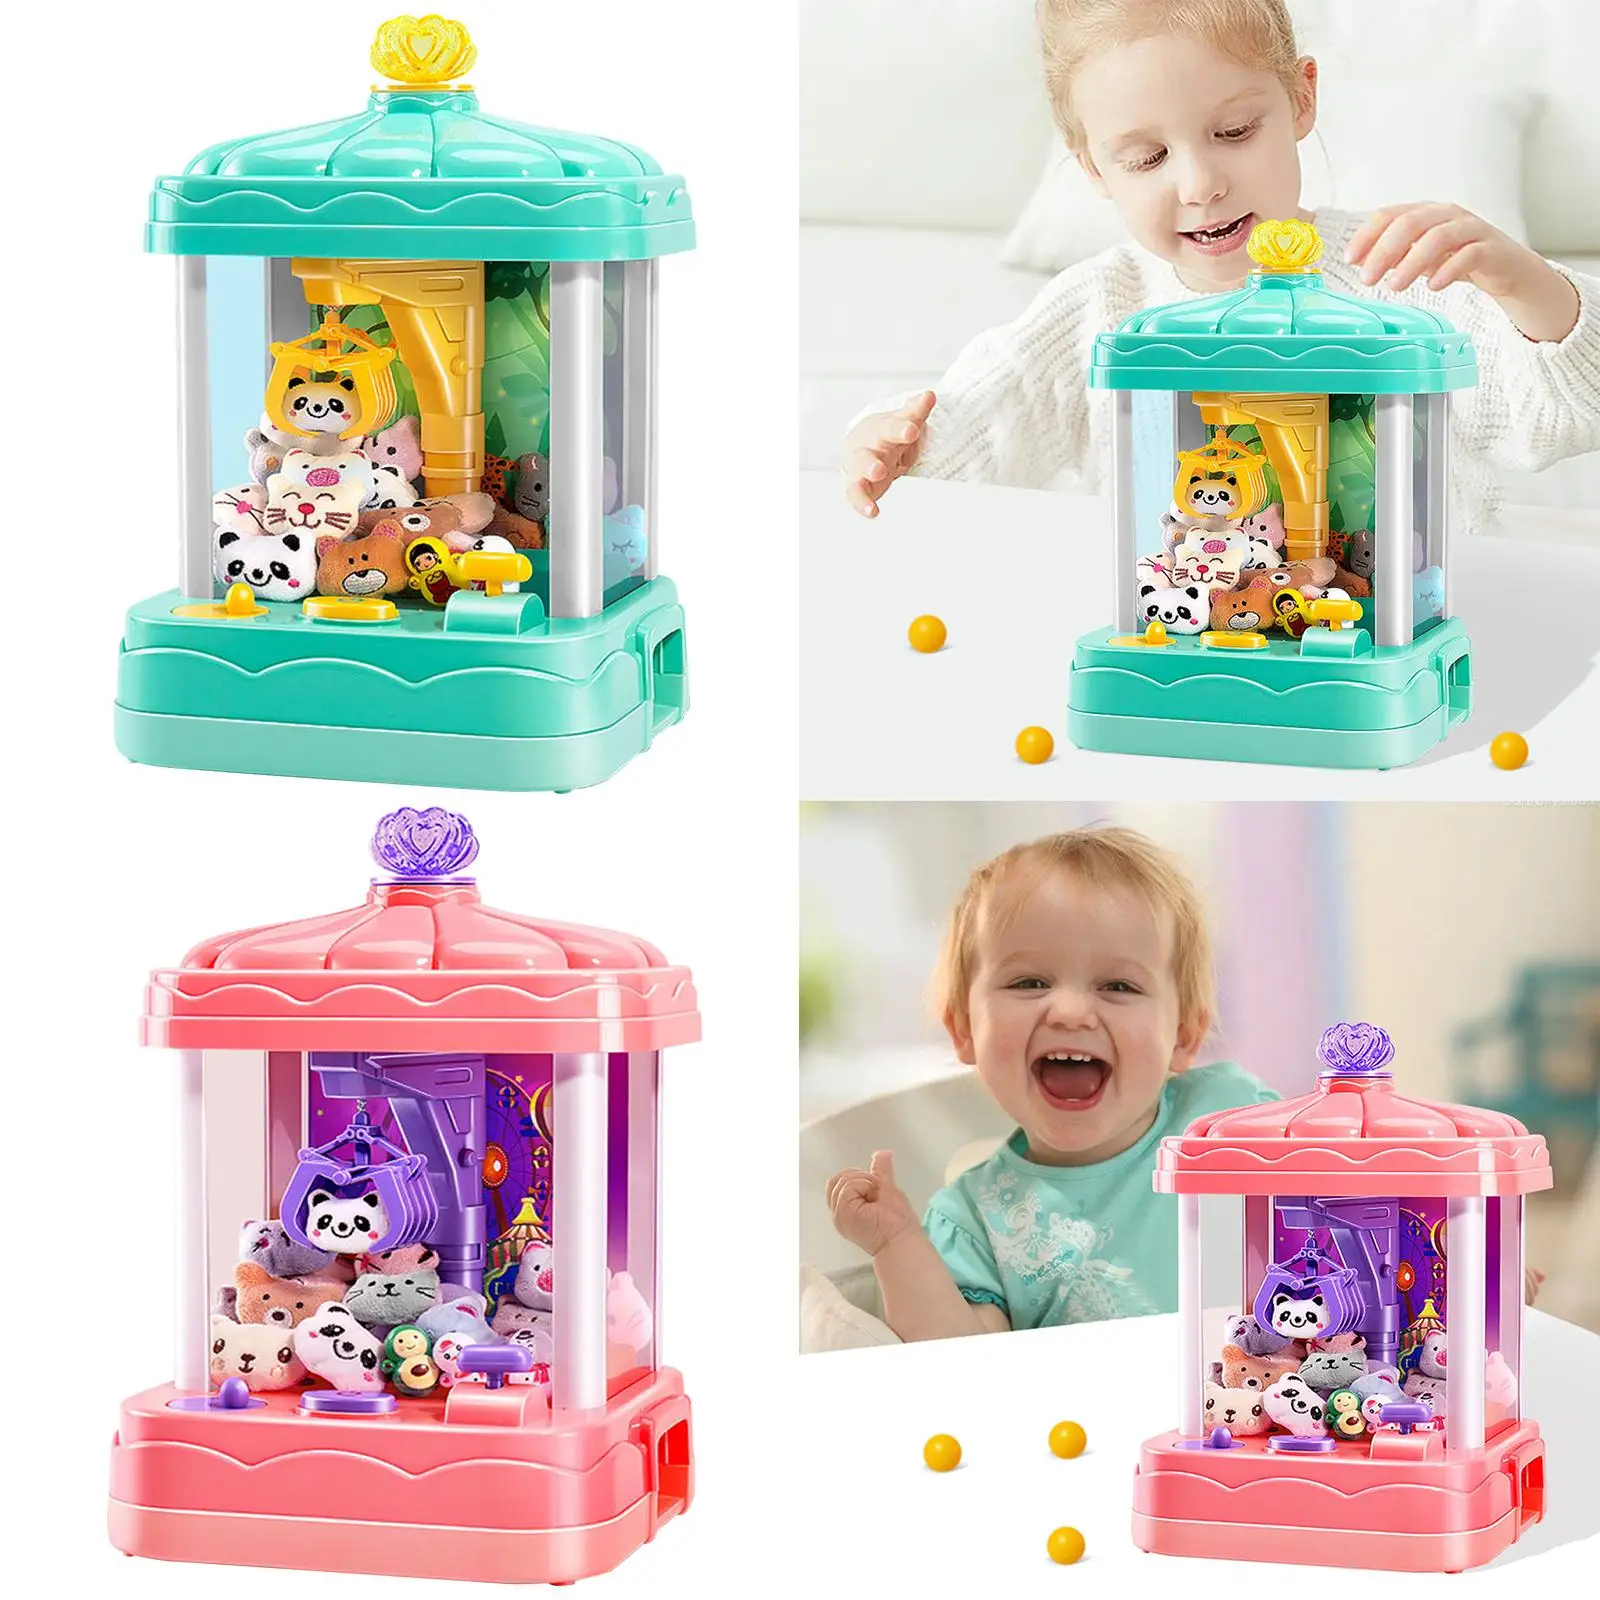 Children Claw Machine Doll Machine Claw Toy Two Power Supply Modes , 360 Degree Rotating Joystick Control DIY Play Game Safe